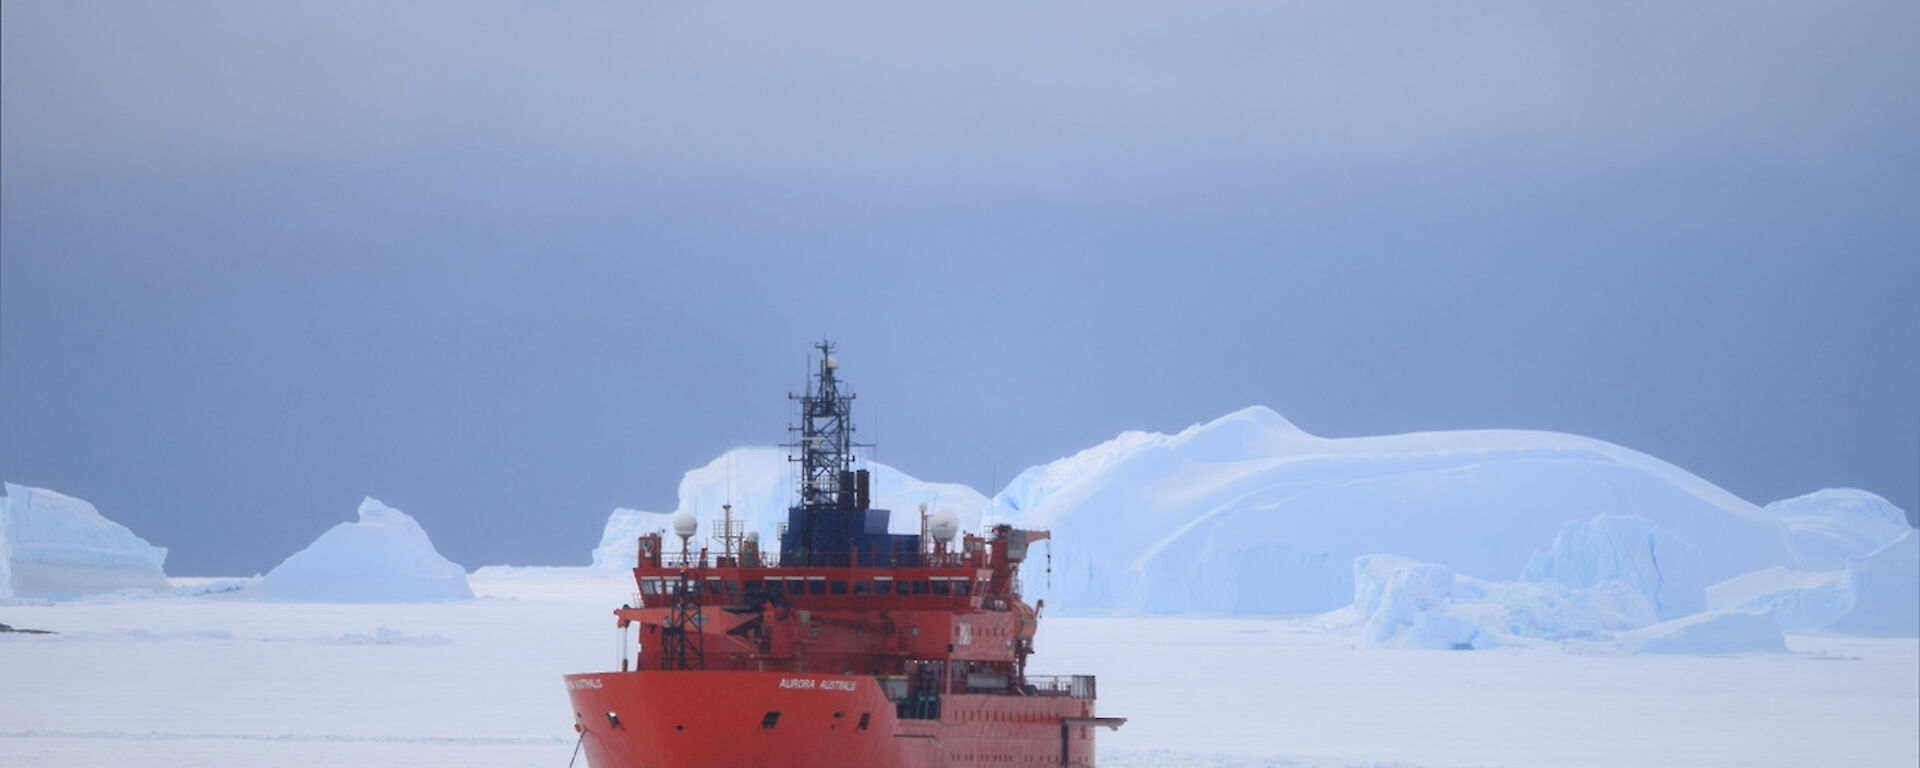 Aurora Australis parked up in the sea ice